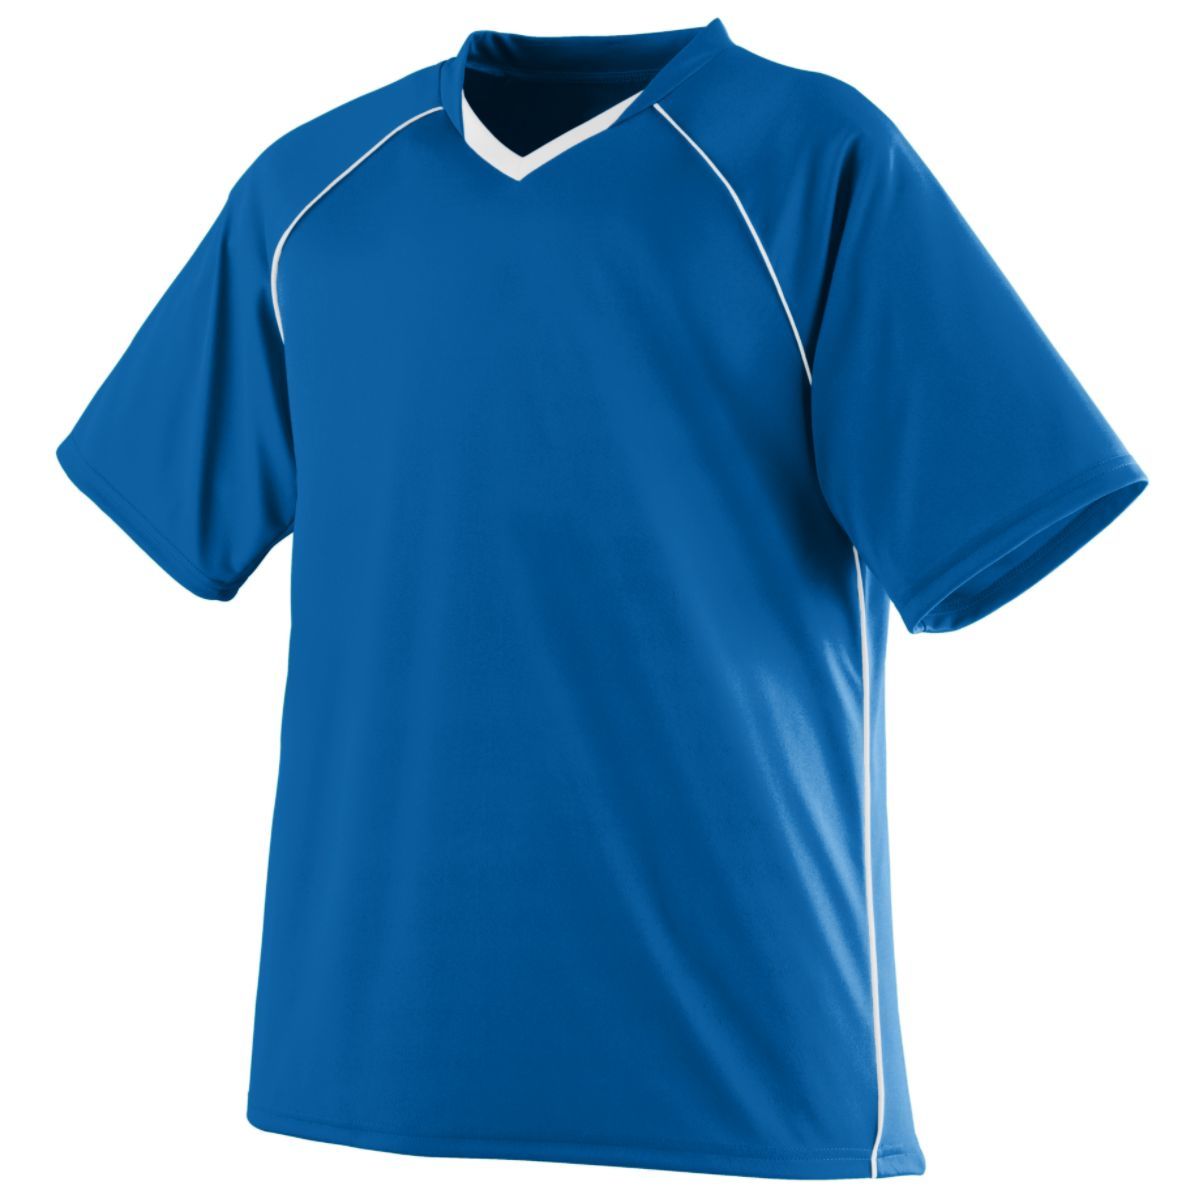 Augusta Sportswear Striker Jersey in Royal/White  -Part of the Adult, Adult-Jersey, Augusta-Products, Soccer, Shirts, All-Sports-1 product lines at KanaleyCreations.com